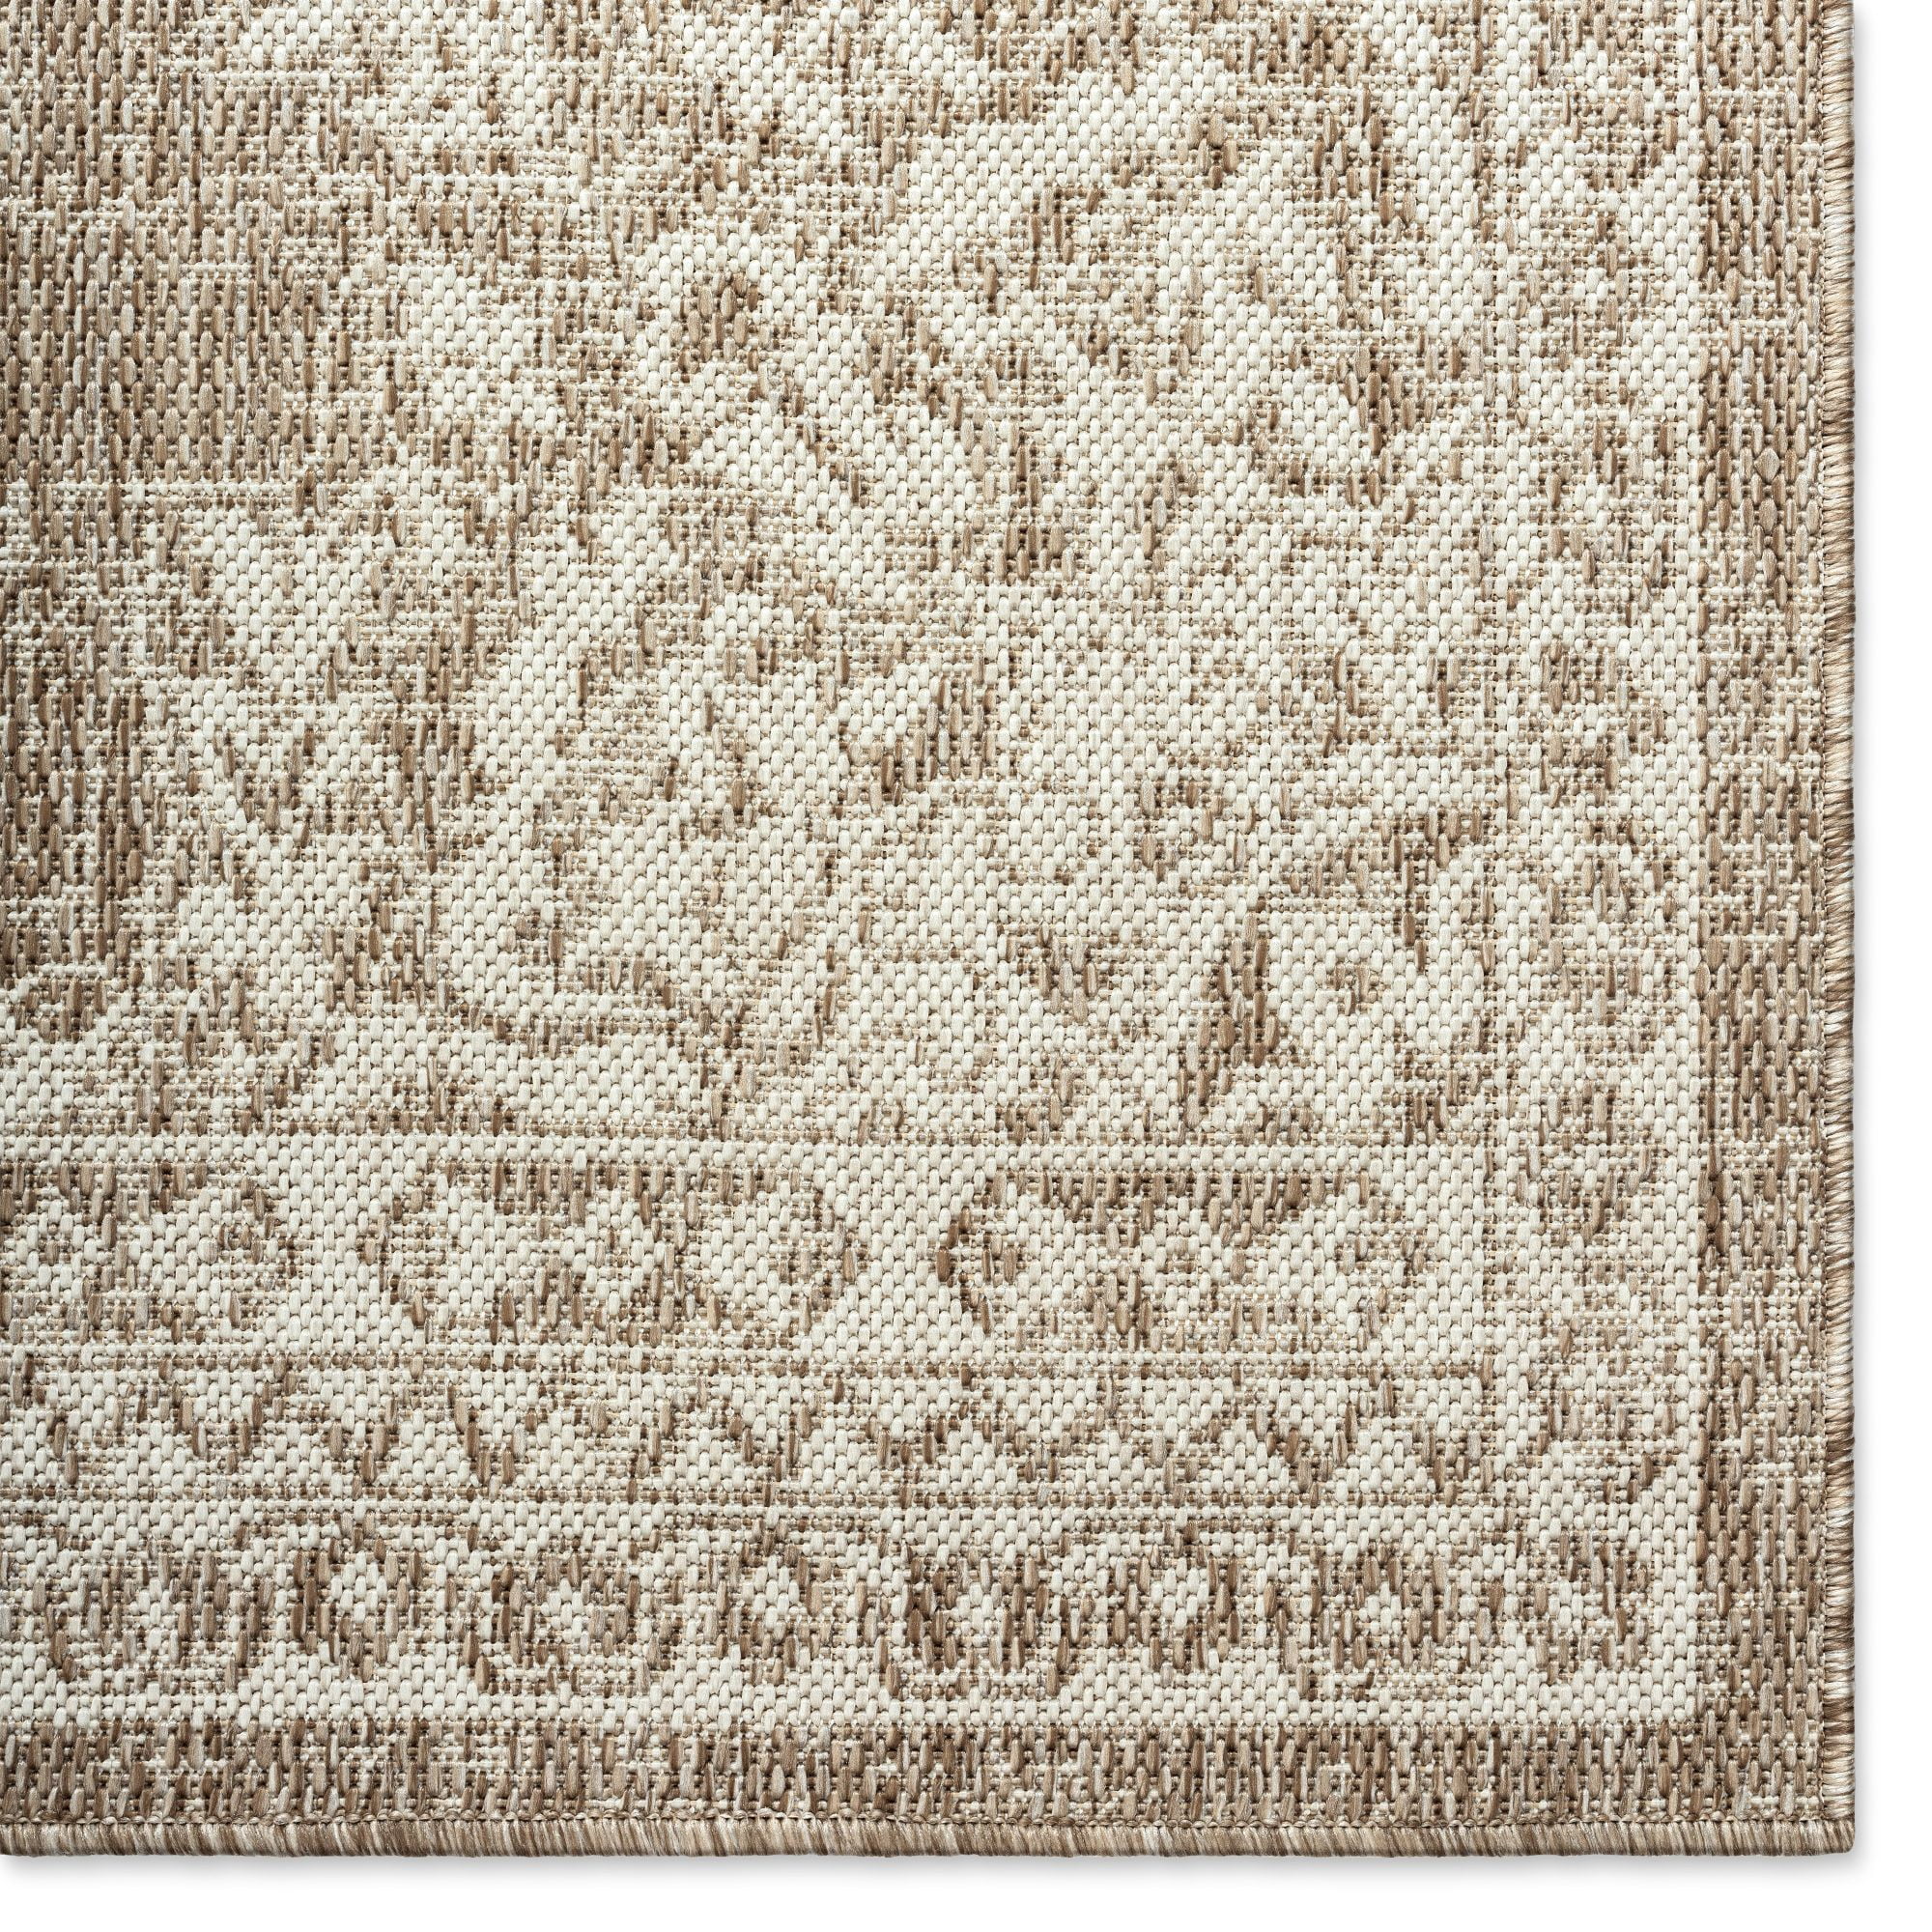 Nicole Miller New York Patio Country Azalea Transitional Medallion Indoor Outdoor Area Rug Taupe Ivory 5 2 X7 Com